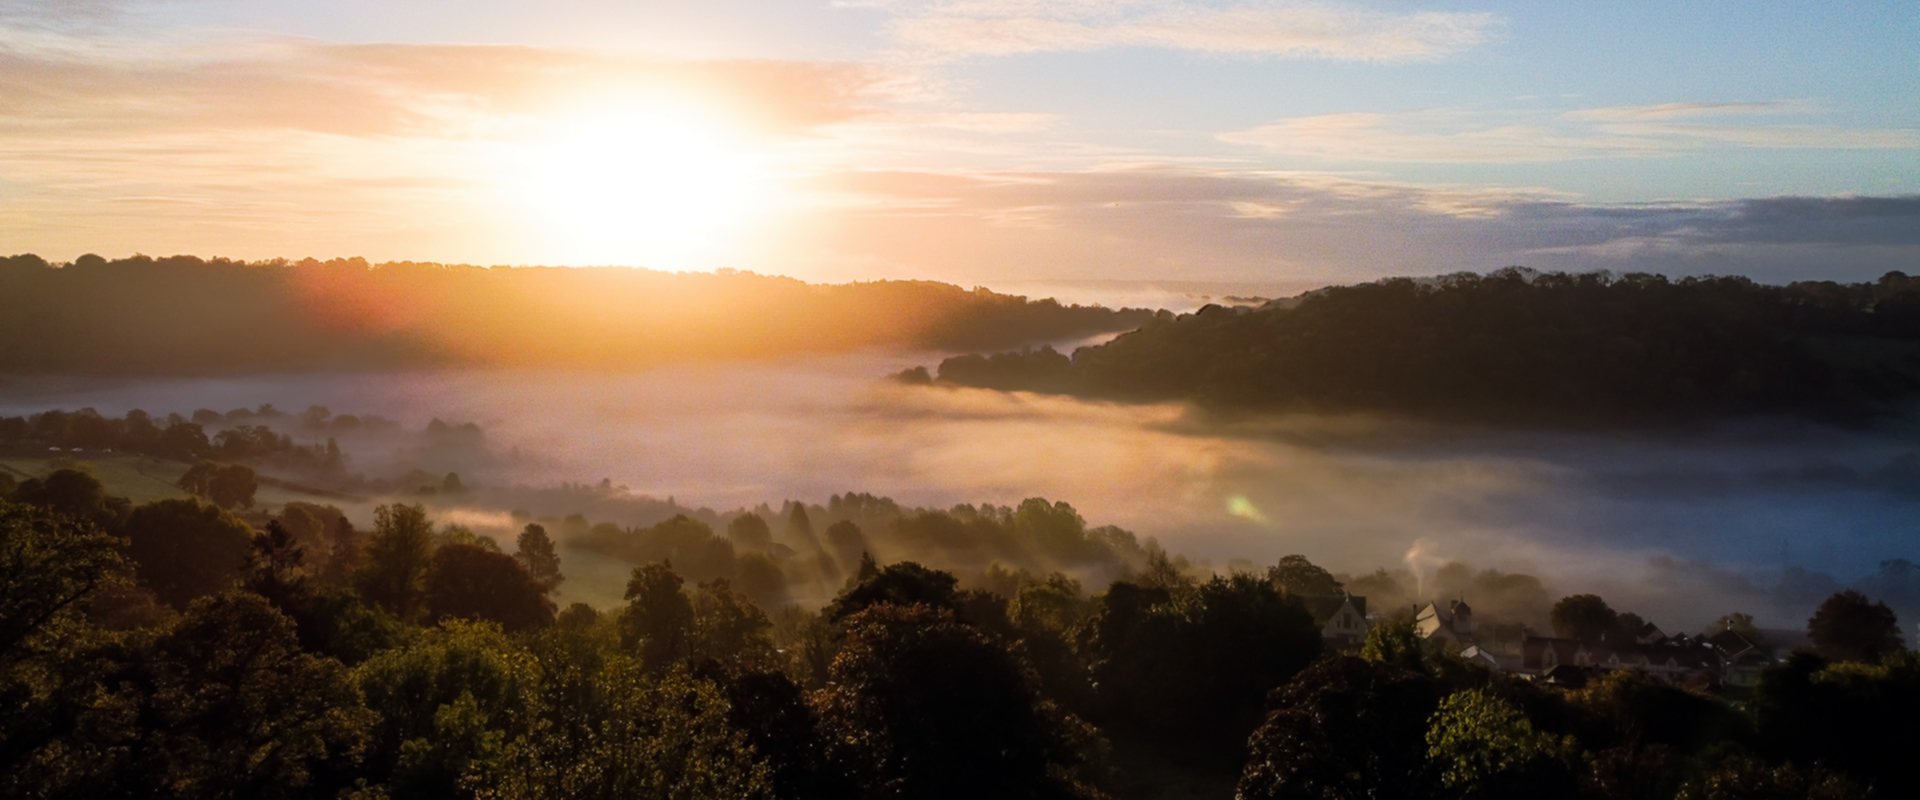 Combe Grove valley sunrise in the morning covered by mist